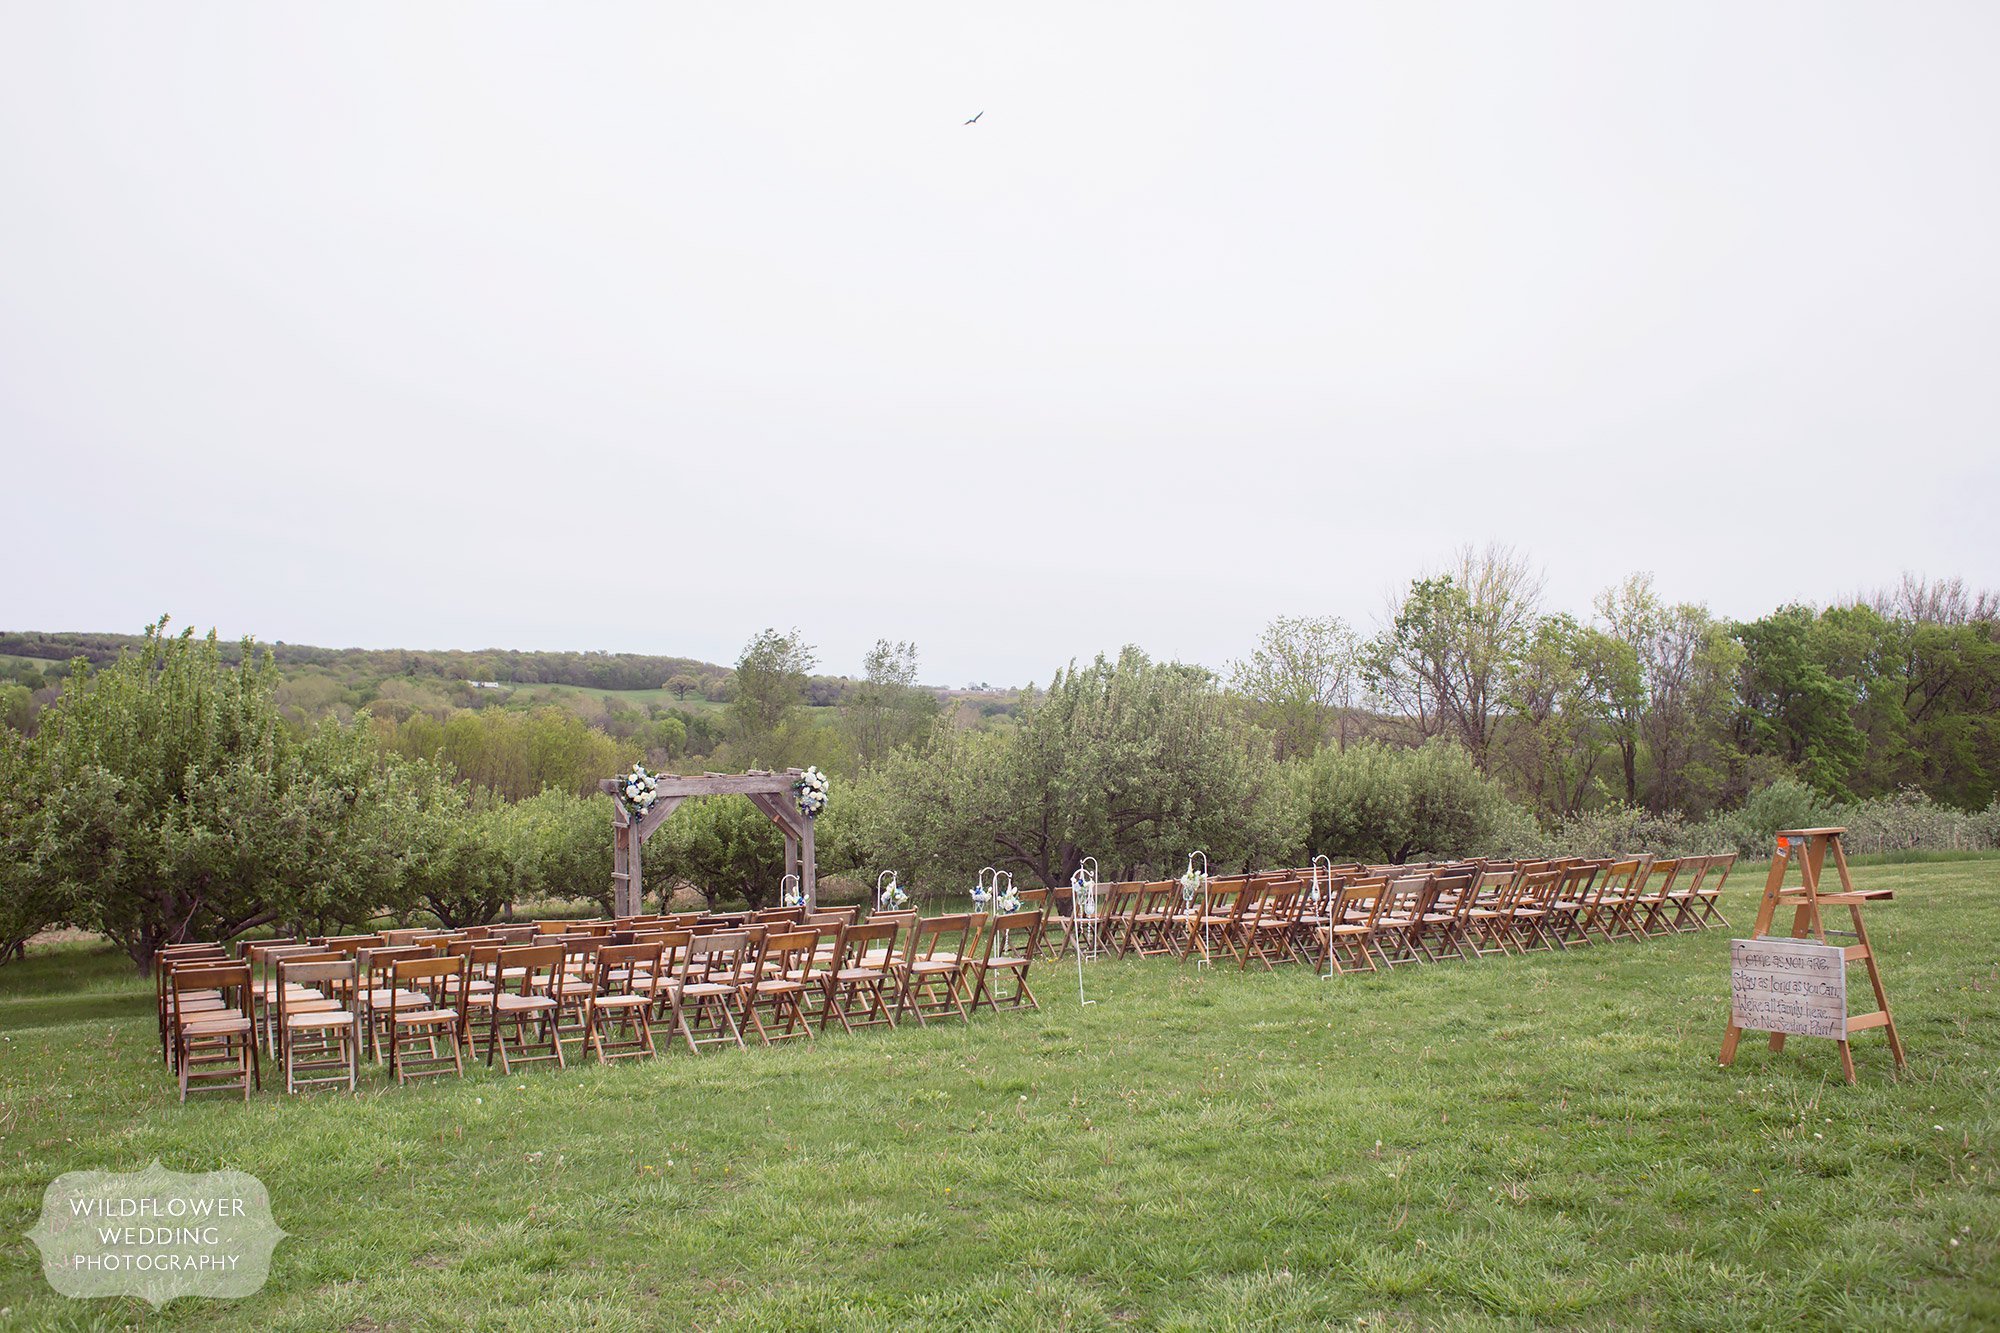 Scenic outdoor location for a wedding ceremony set in the apple orchard at the Weston Red Barn Farm.